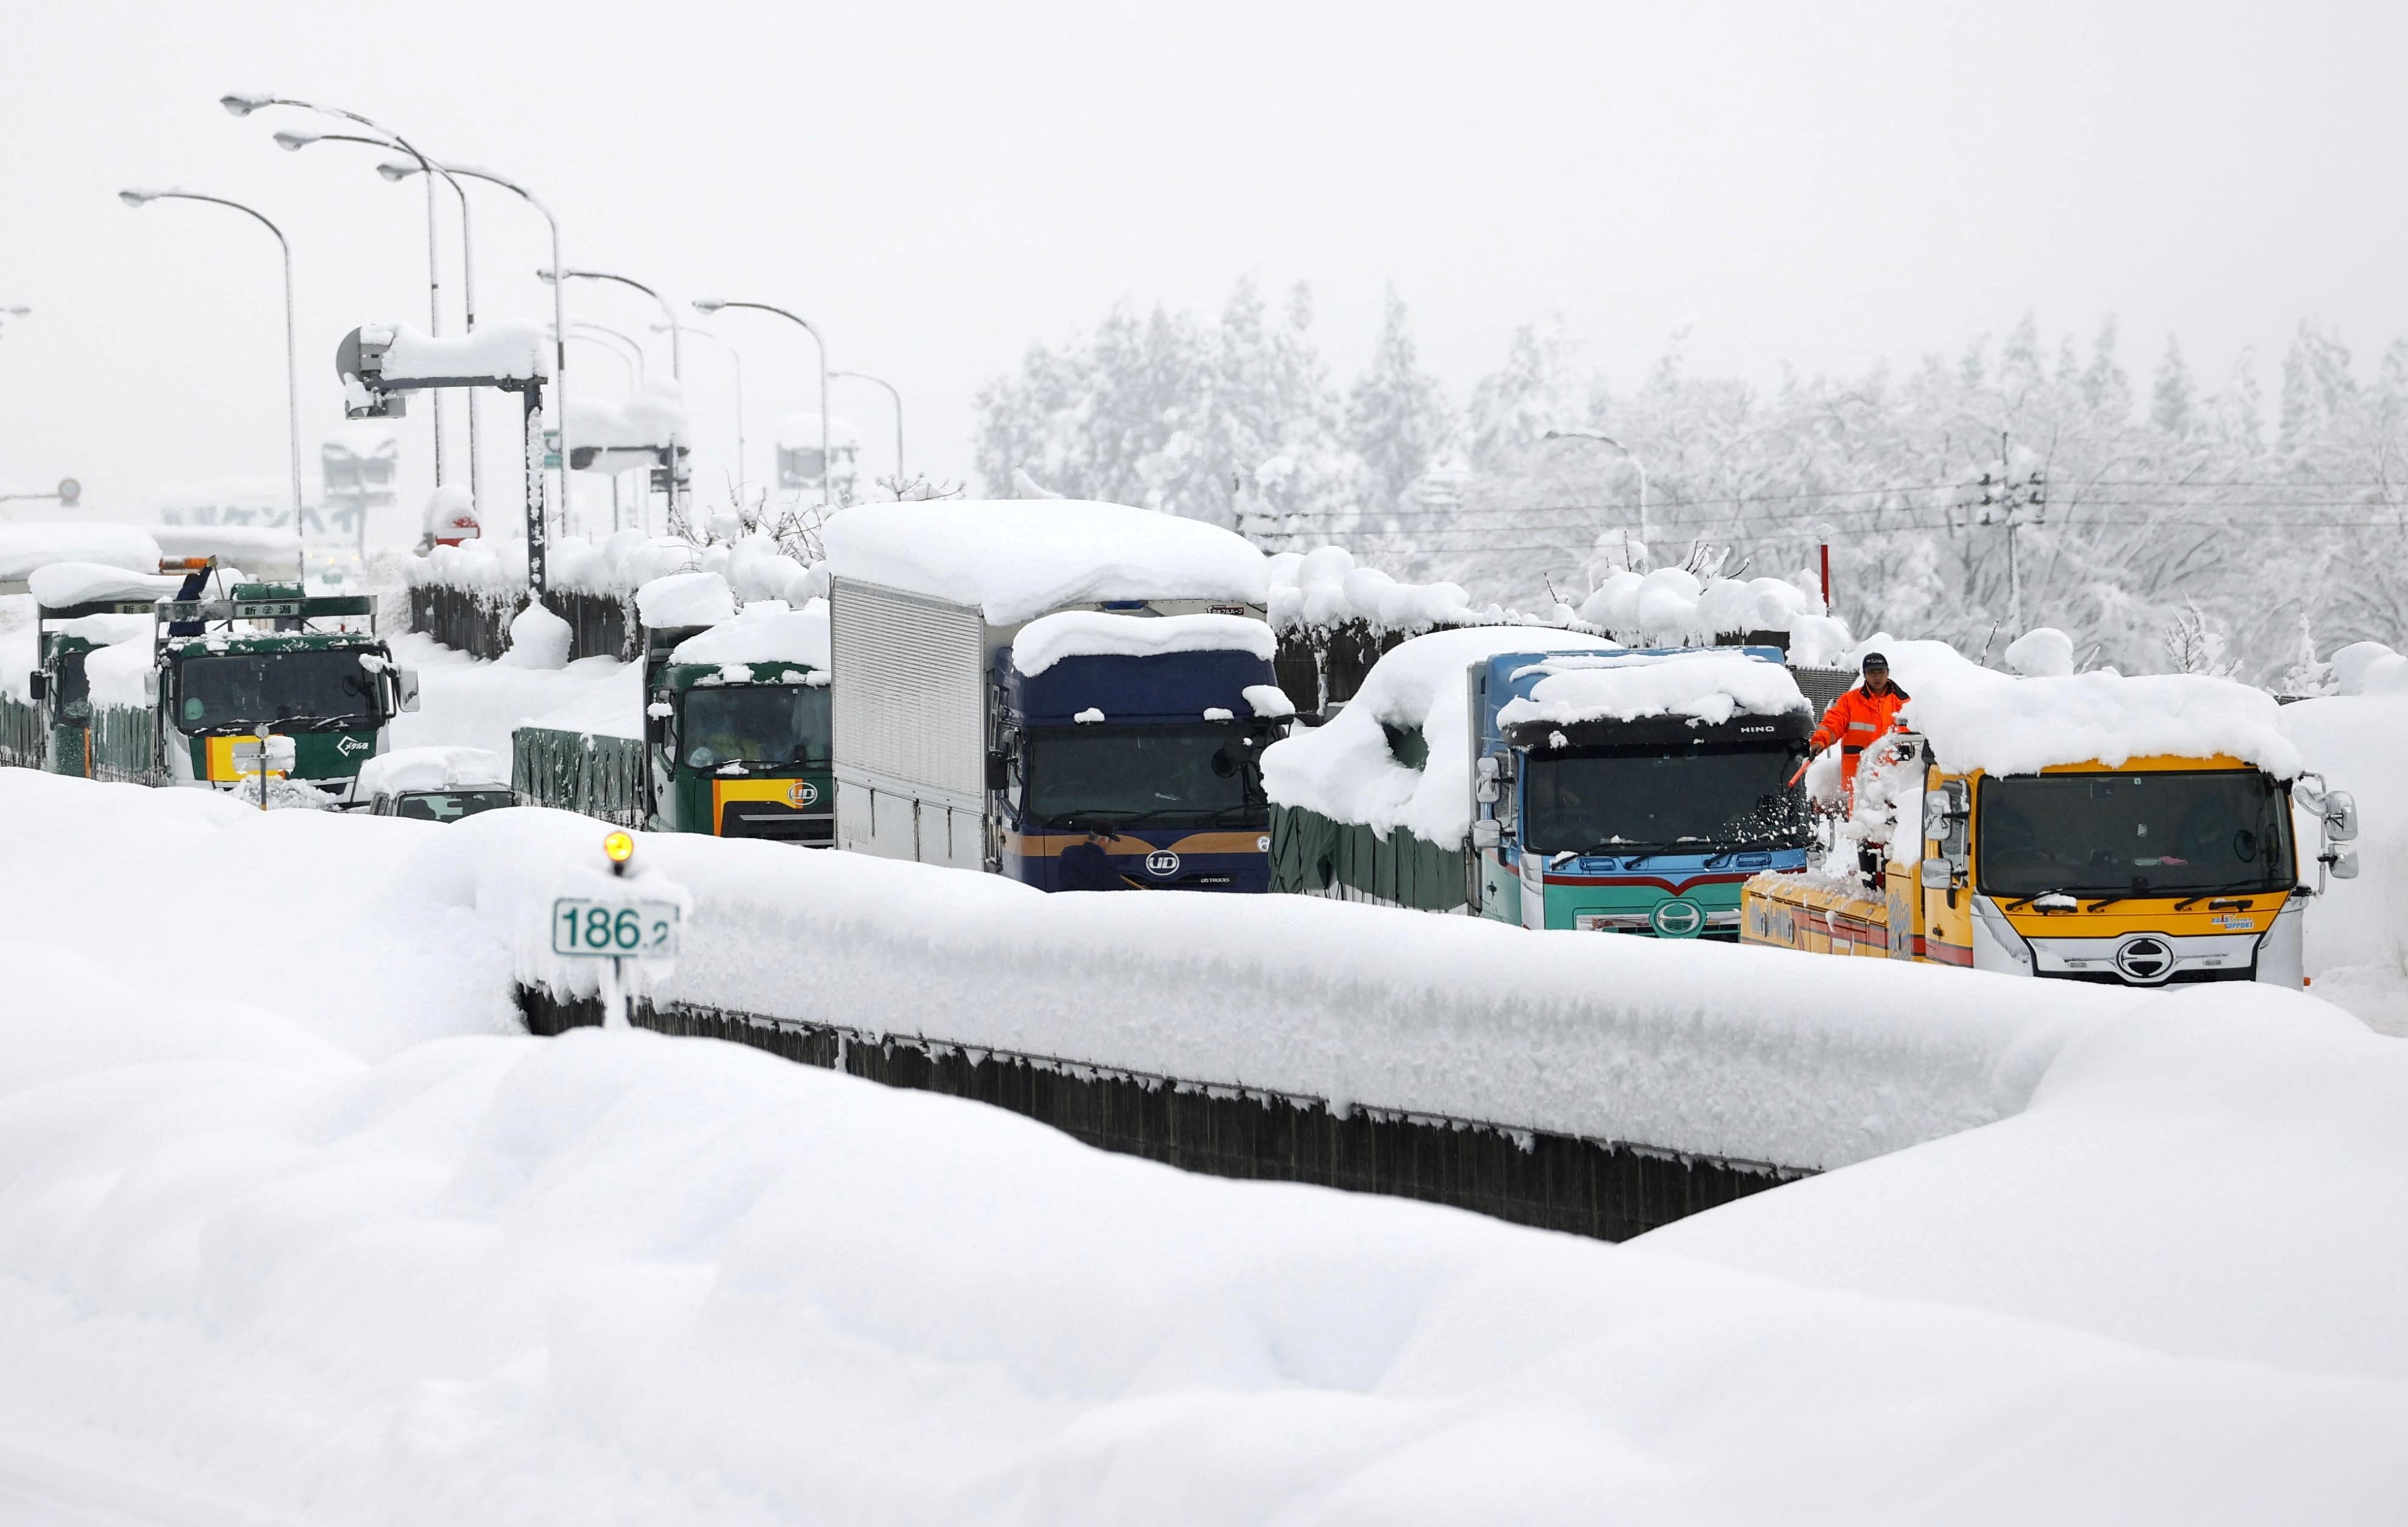 Vehicles are stranded on the snow-covered Kanetsu expressway in Minamiuonuma in Niigata Prefecture, Japan&nbsp;